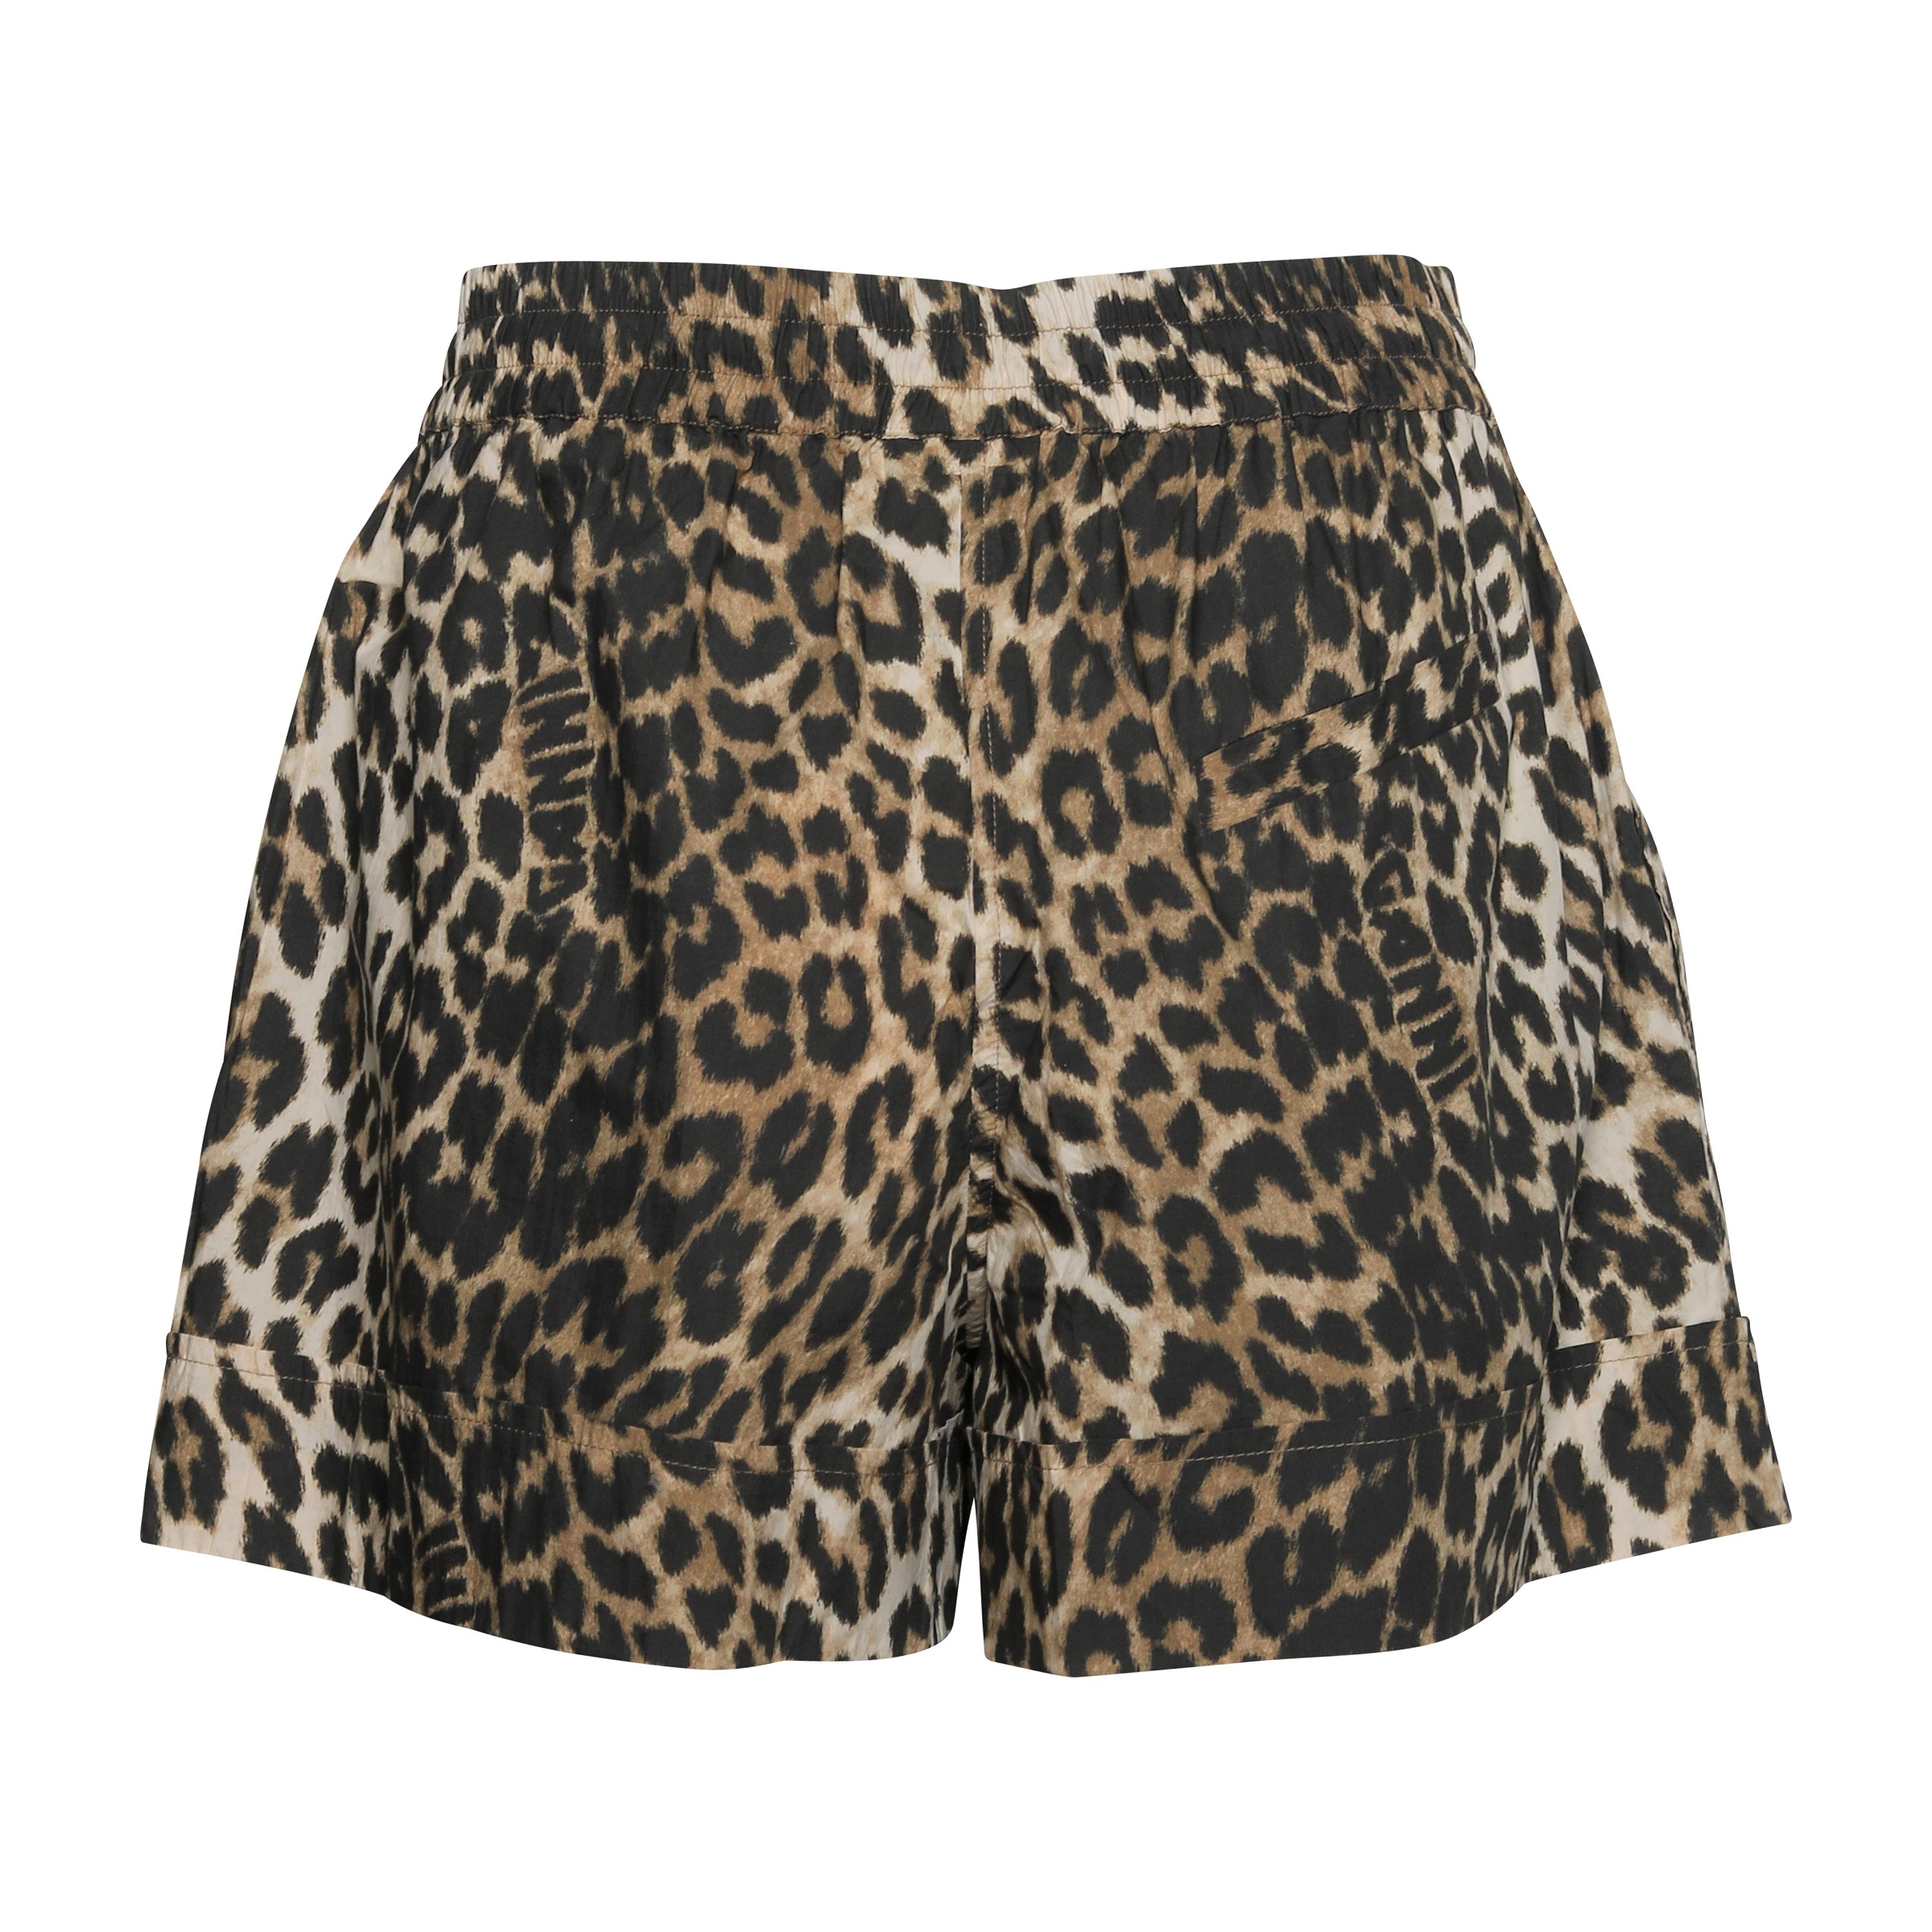 GANNI Printed Cotton Elasticated Shorts in Leopard 34